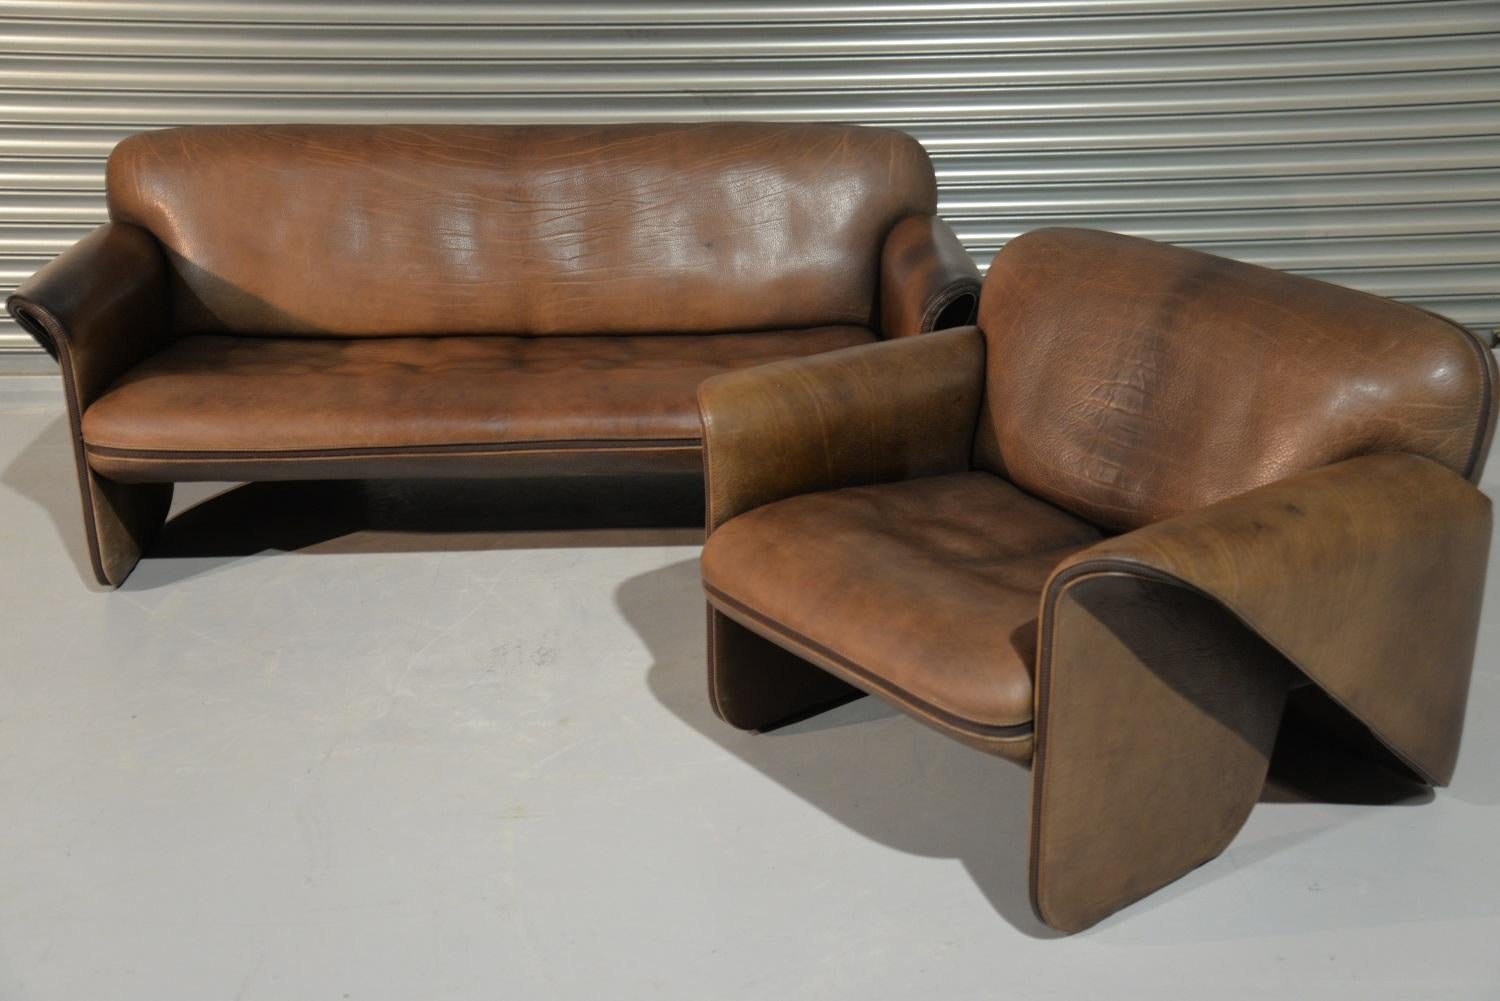 Discounted airfreight for our International Customers (from 2 weeks door to door) 

We are delighted to bring to you an ultra rare vintage De Sede DS 125 sofa and armchair designed by Gerd Lange in 1978. These sculptural pieces are upholstered in